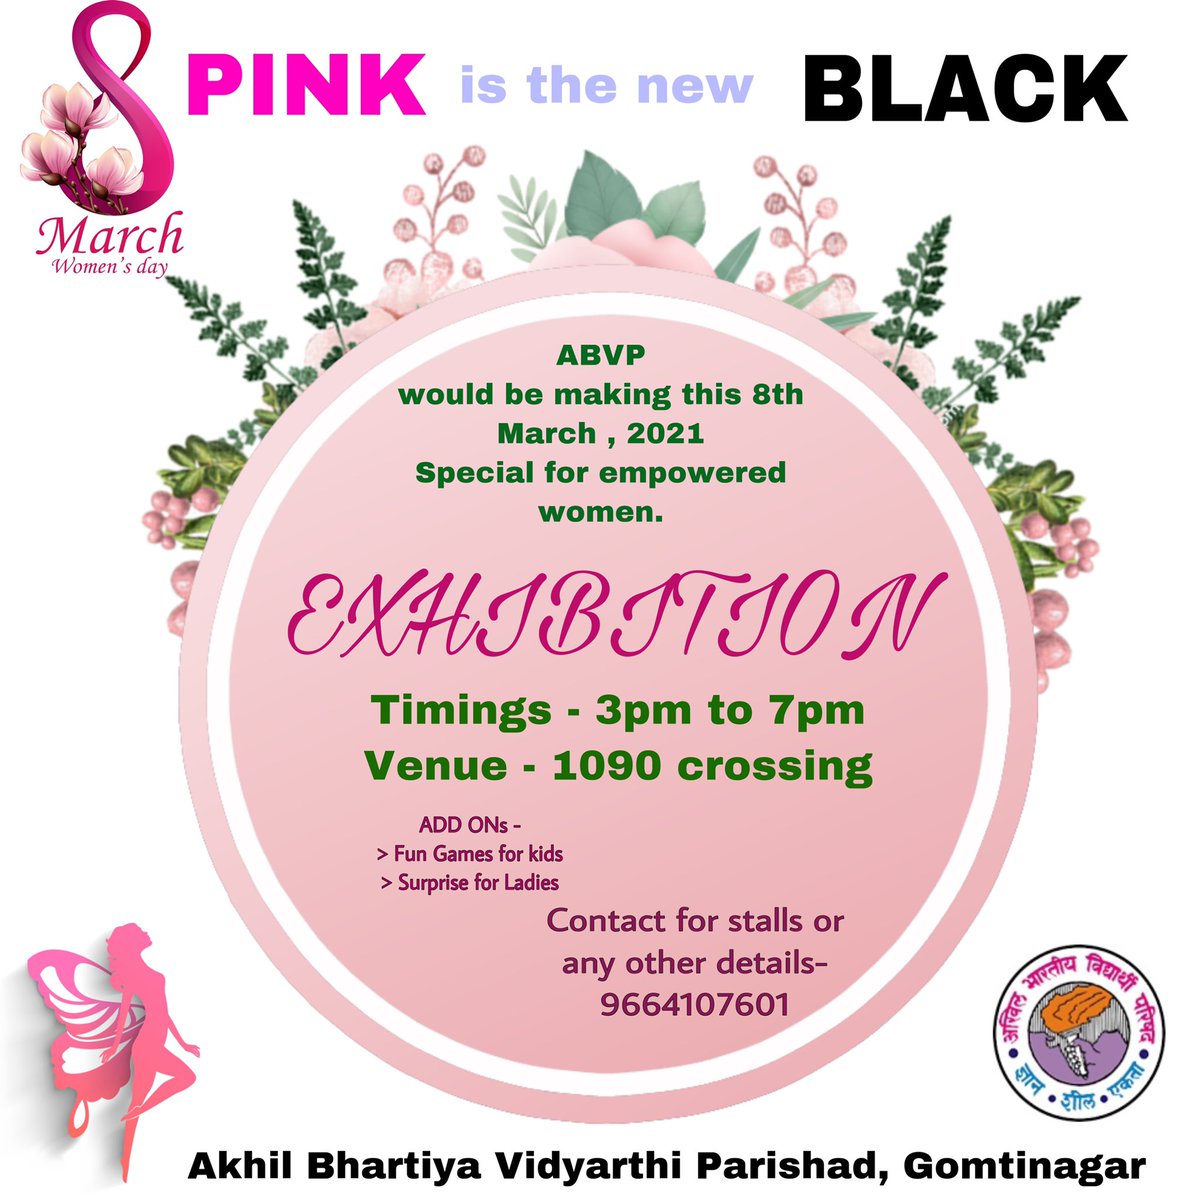 8th March, 2021 - women’s day , let’s be creative and make a move.
A move towards upliftment and empowerment of women. 
#pinkisthenewblack #InternationalWomensDay 
@ABVPVoice